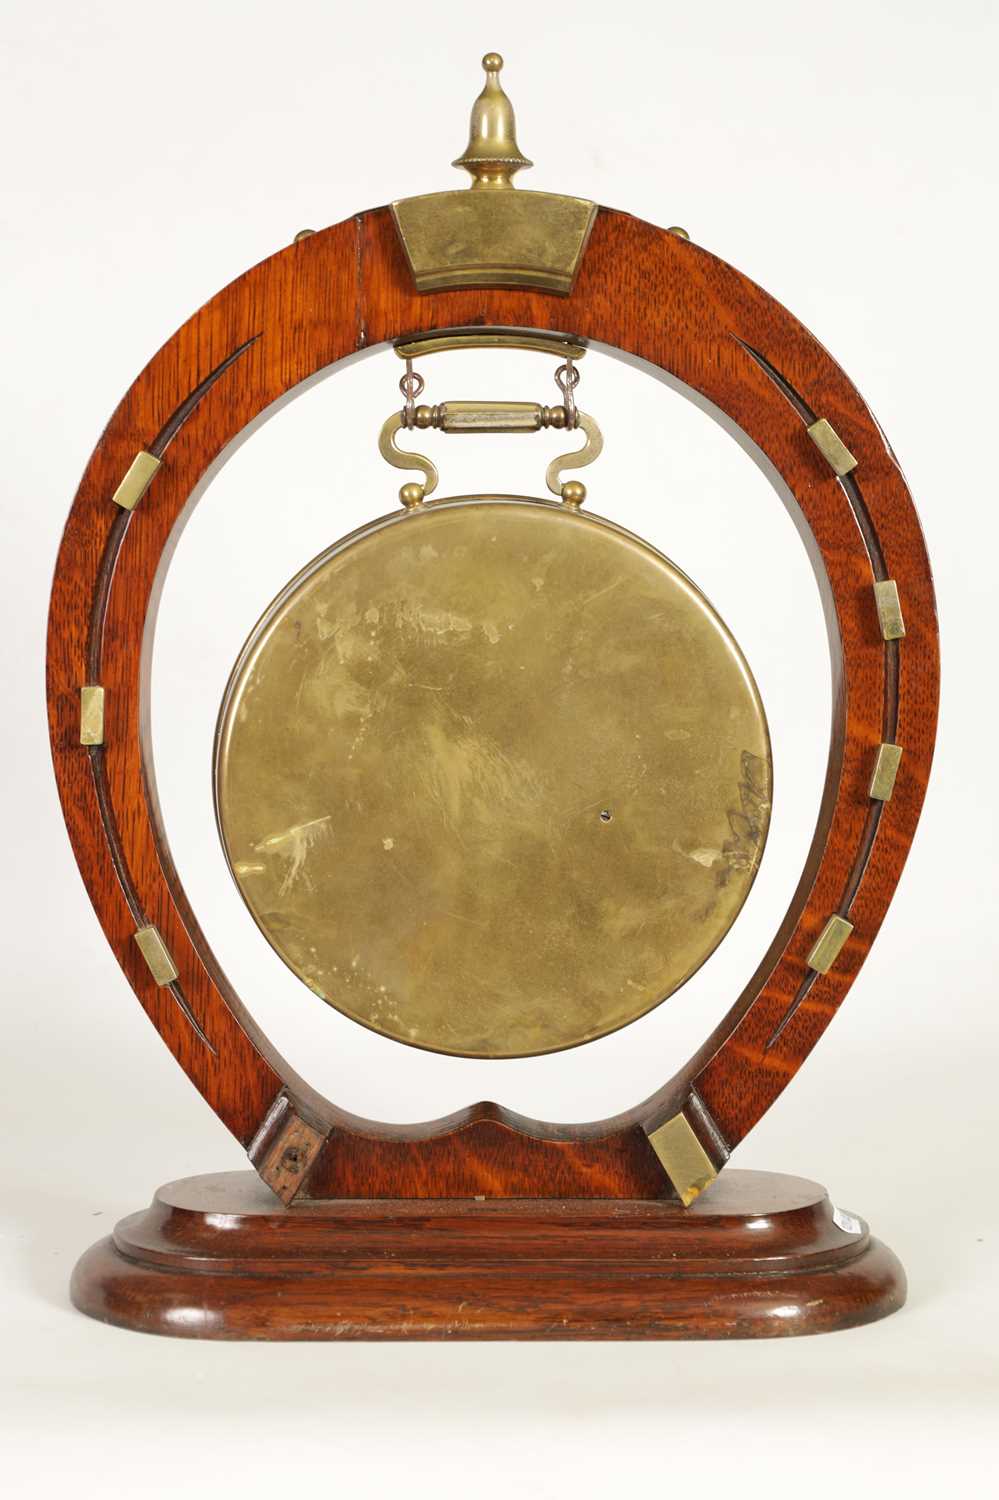 AN UNUSUAL LATE 19TH CENTURY BAROMETER OF EQUESTRIAN INTEREST - Image 11 of 12